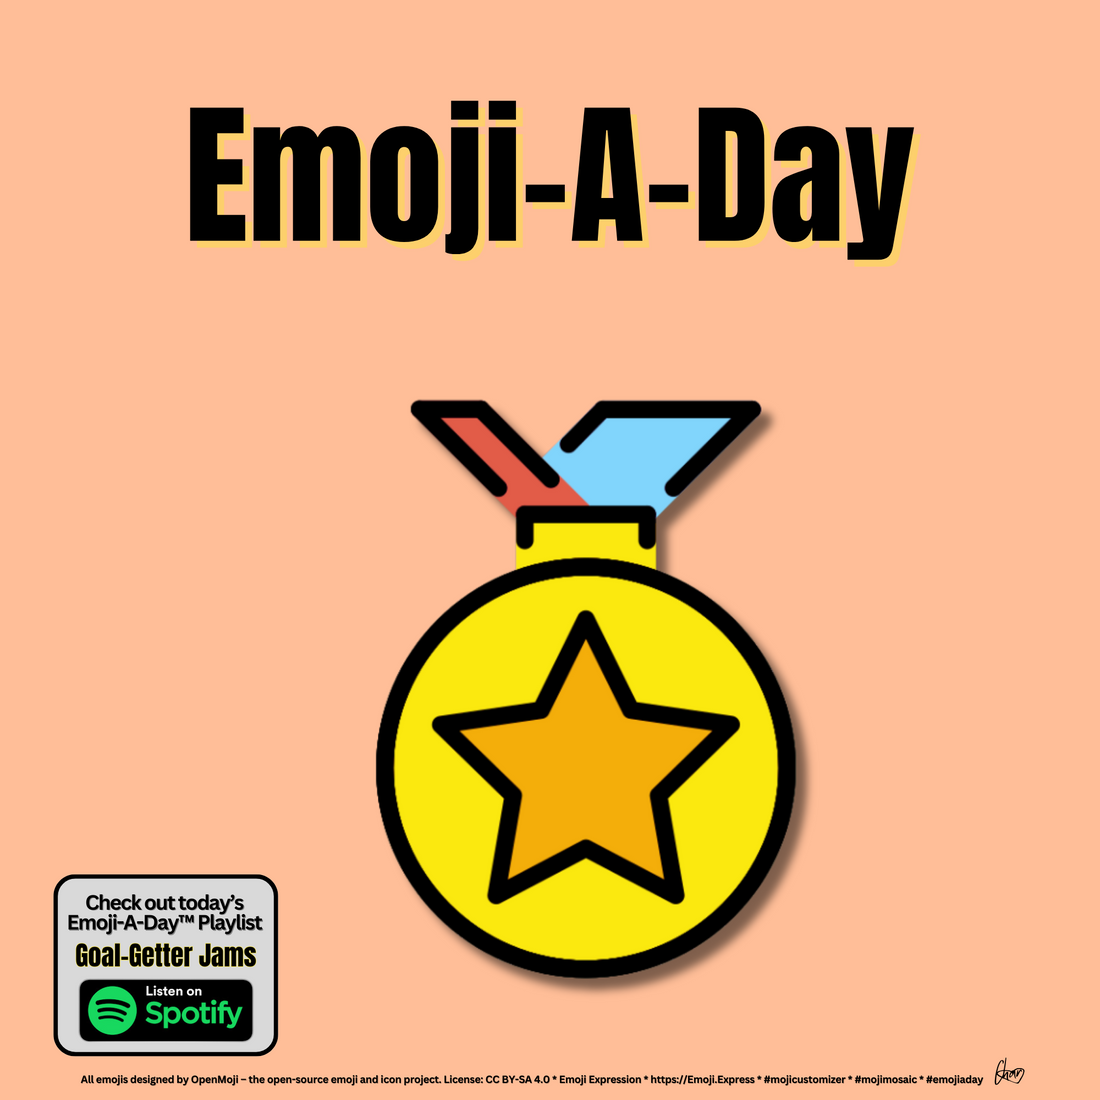 Emoij-A-Day theme with Sports Medal emoji and Goal-Getter Jams Spotify Playlist